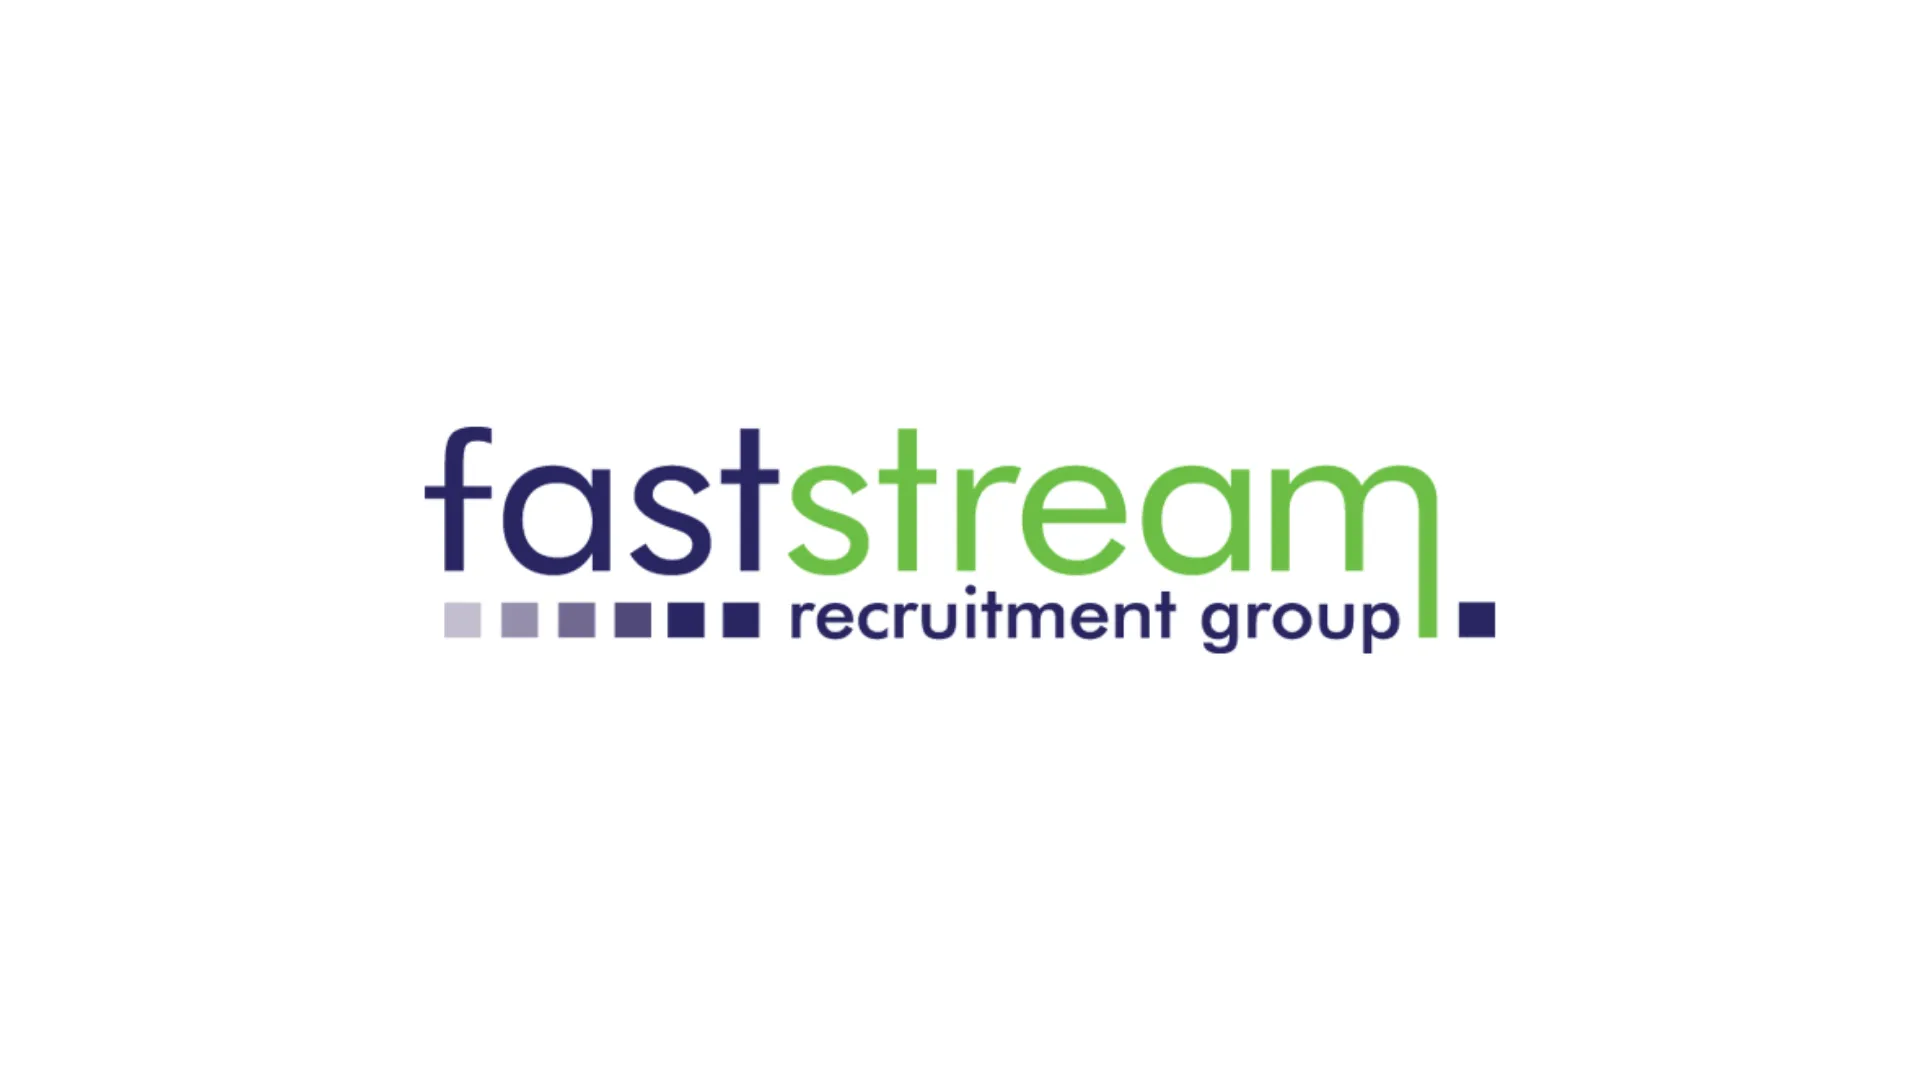 Faststream Recruitment Group is founded